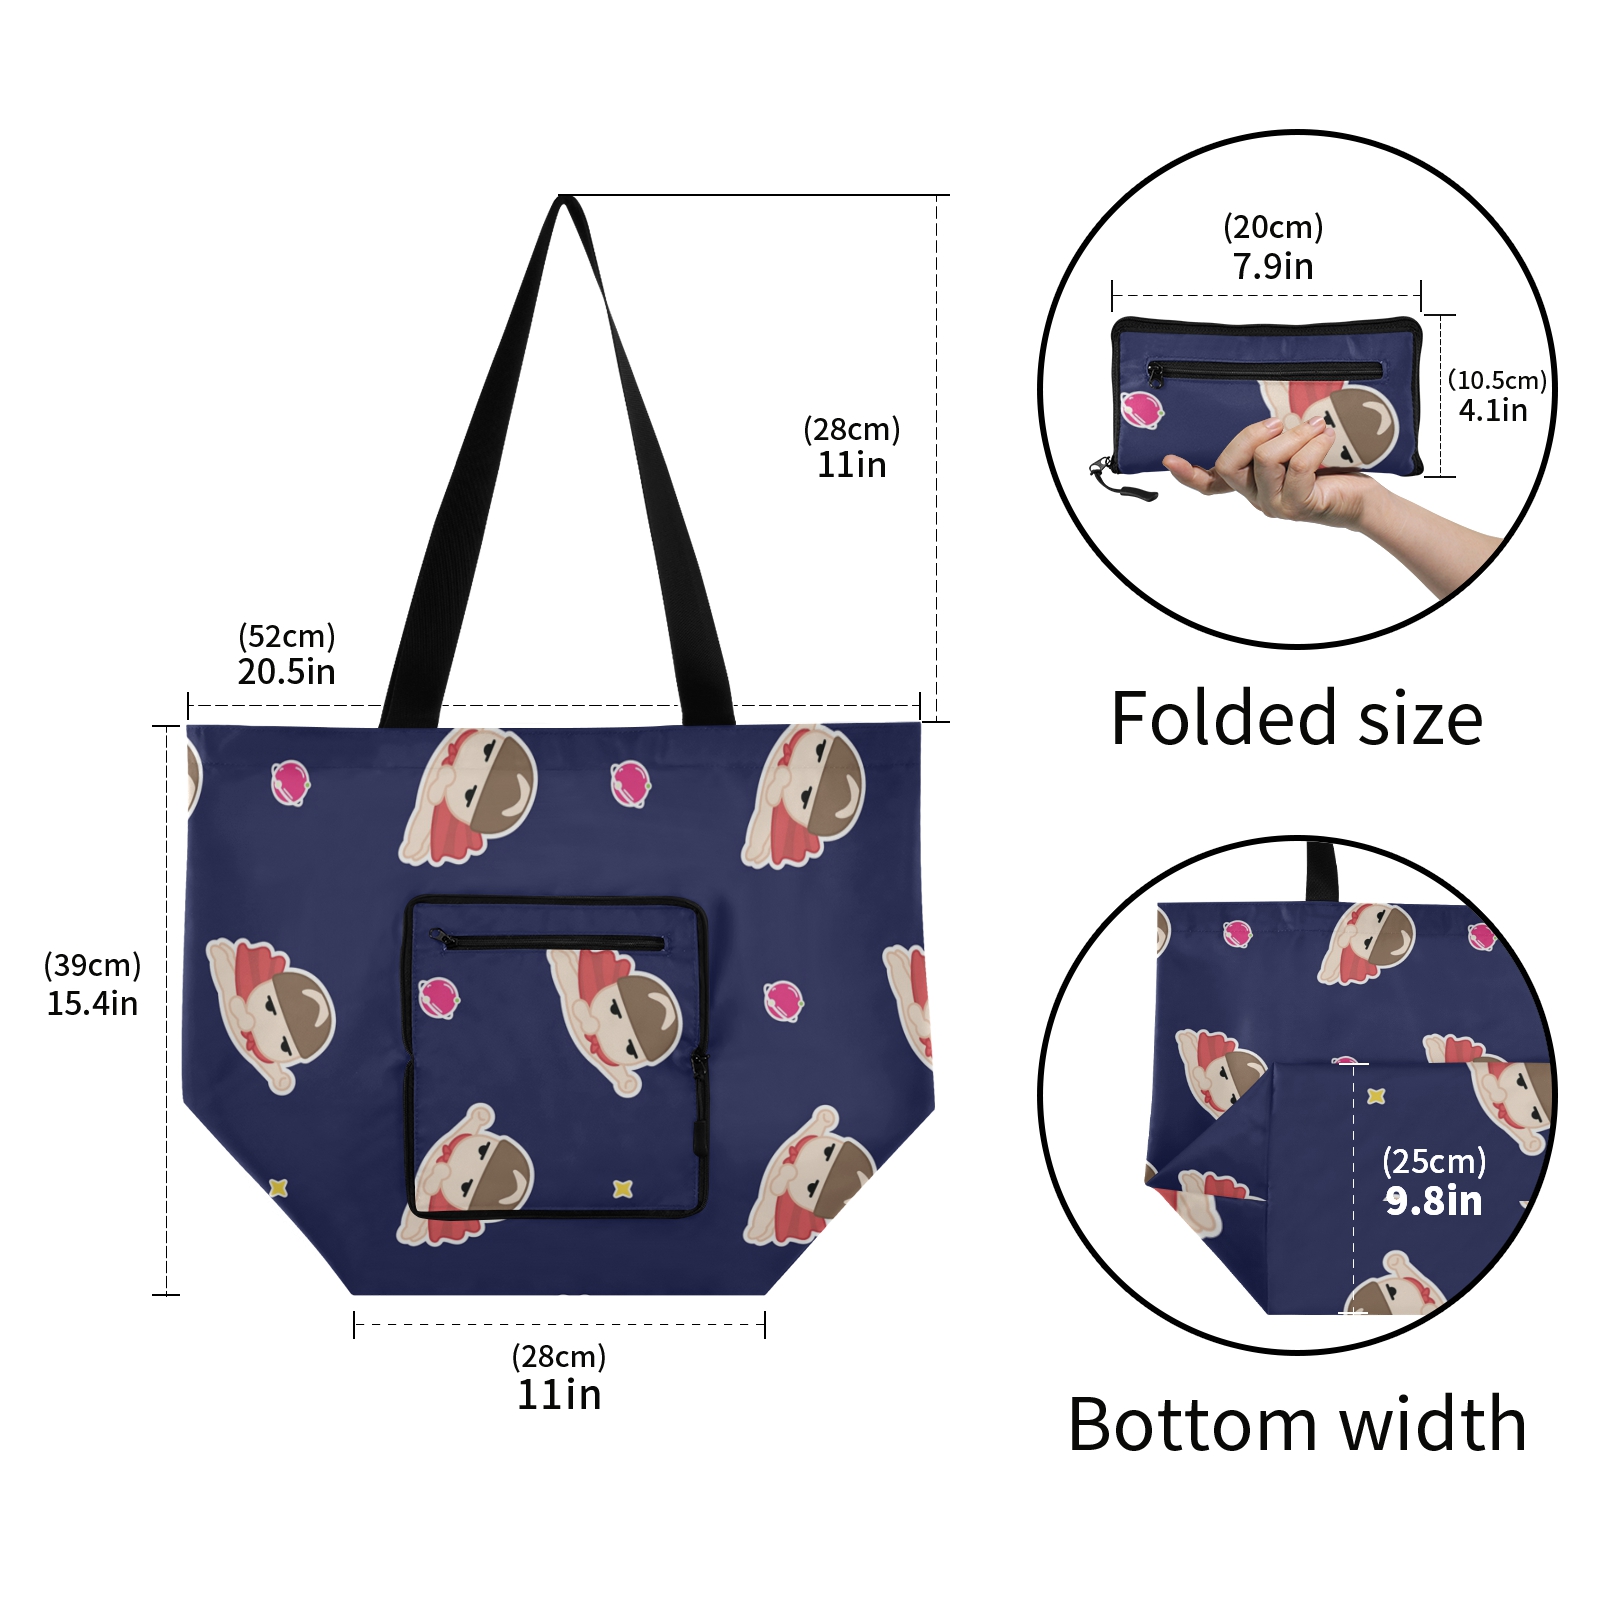 Foldable tote bag for shopping